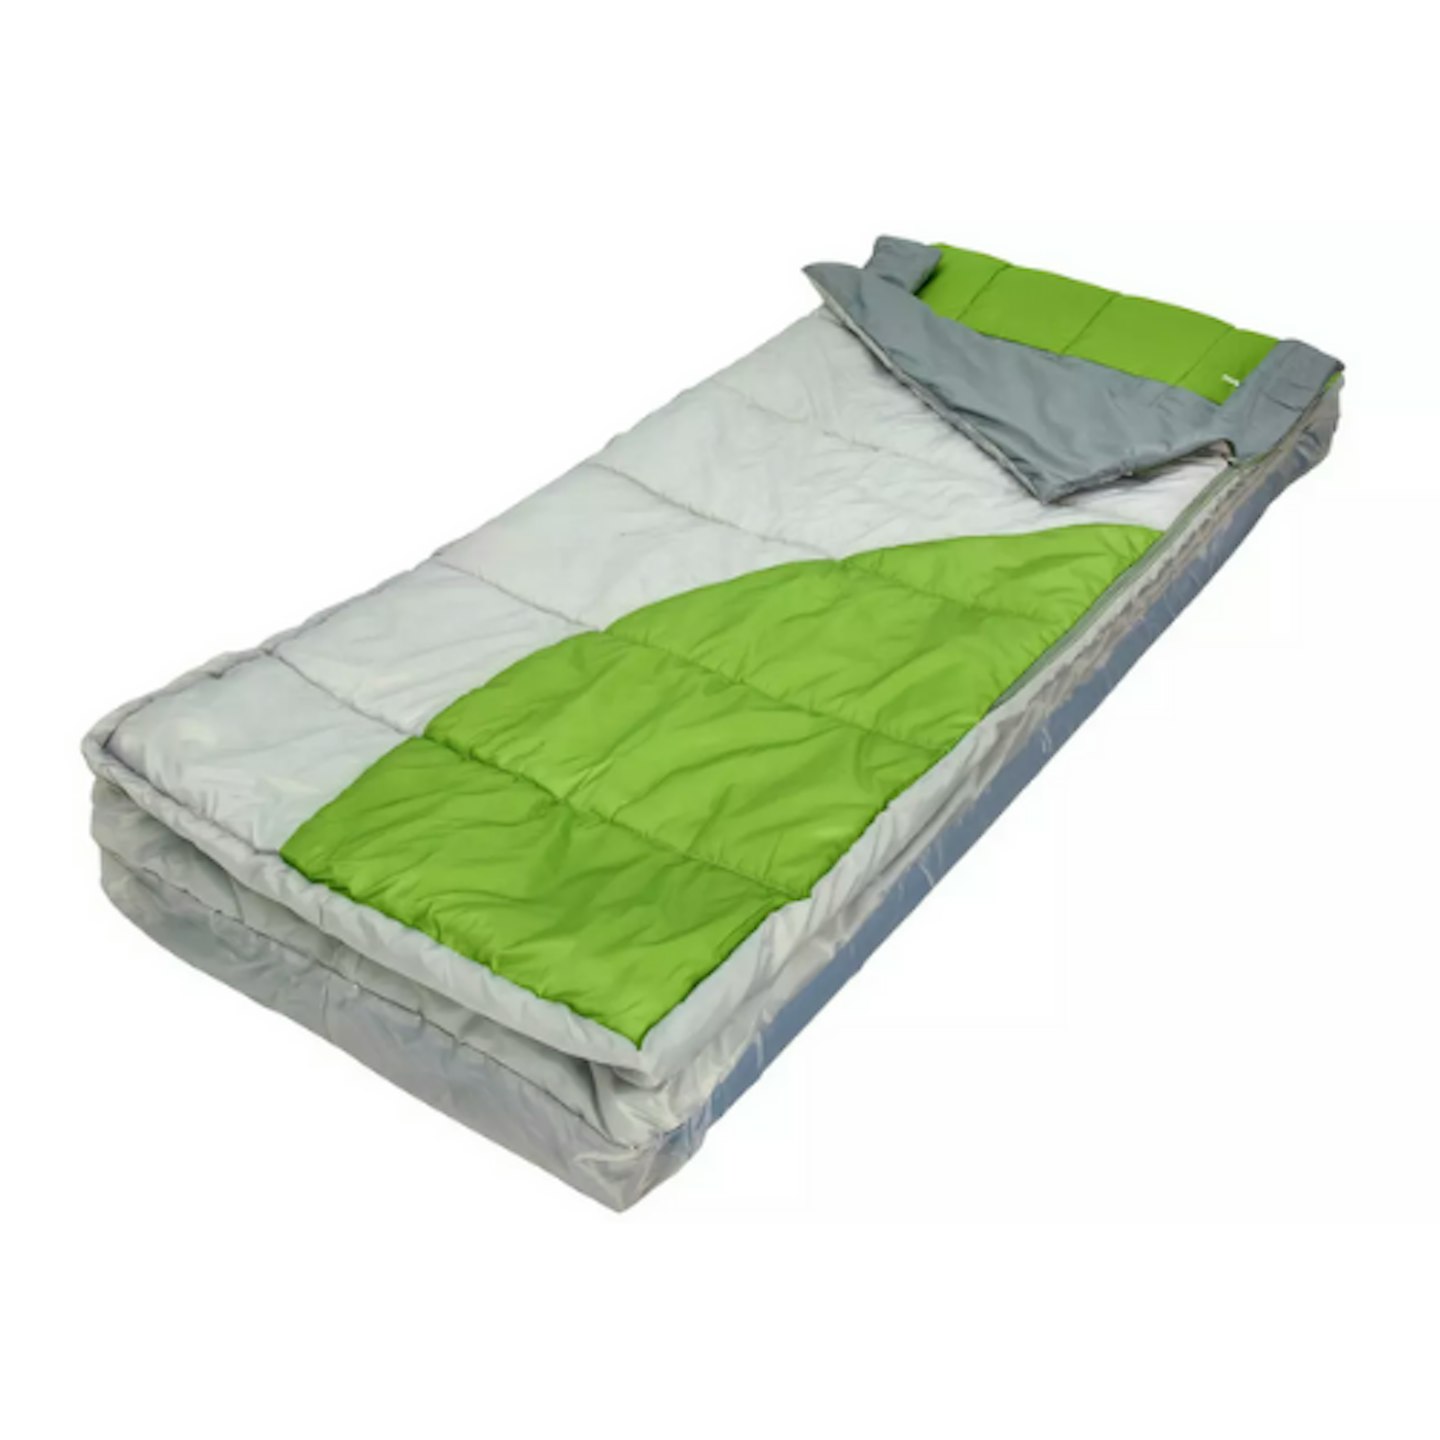 Best sleepover bed ReadyBed Single Inflatable Camping Air Bed and Sleeping Bag